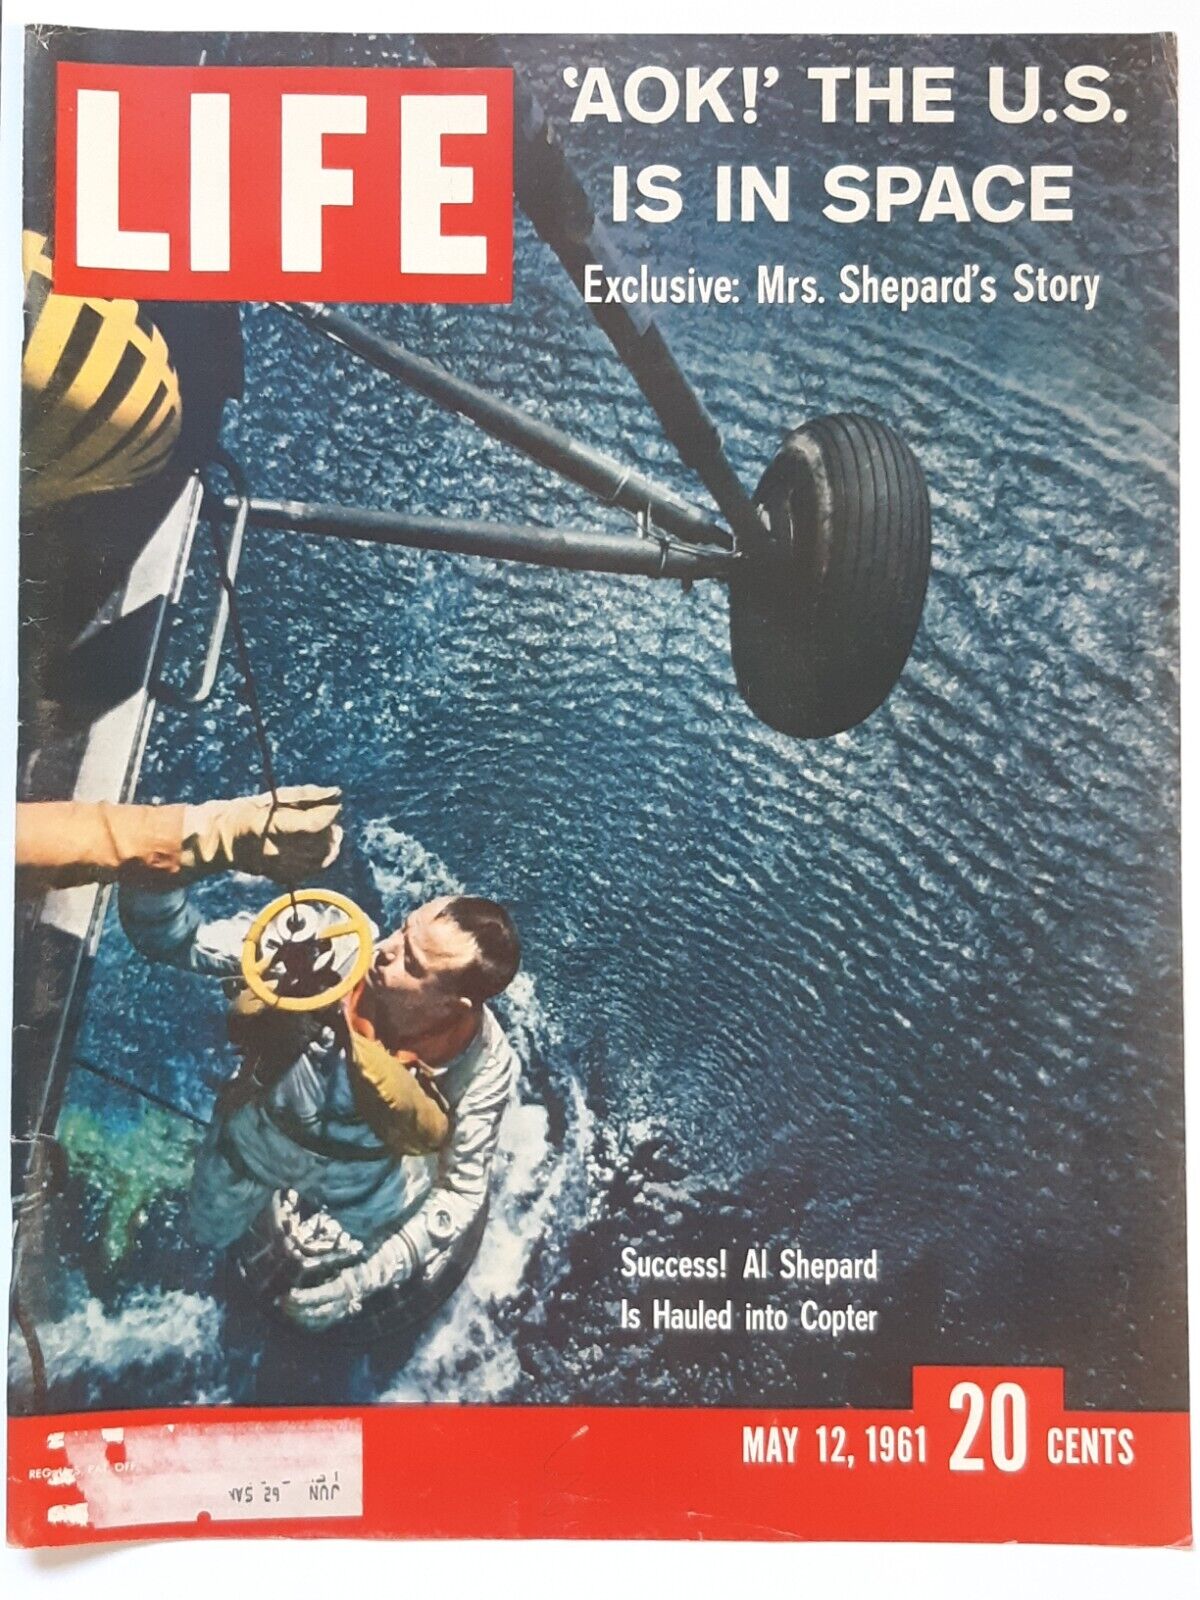 May 12, 1961 Life magazine cover picture.  \'AOK\' The U.S. is in space 